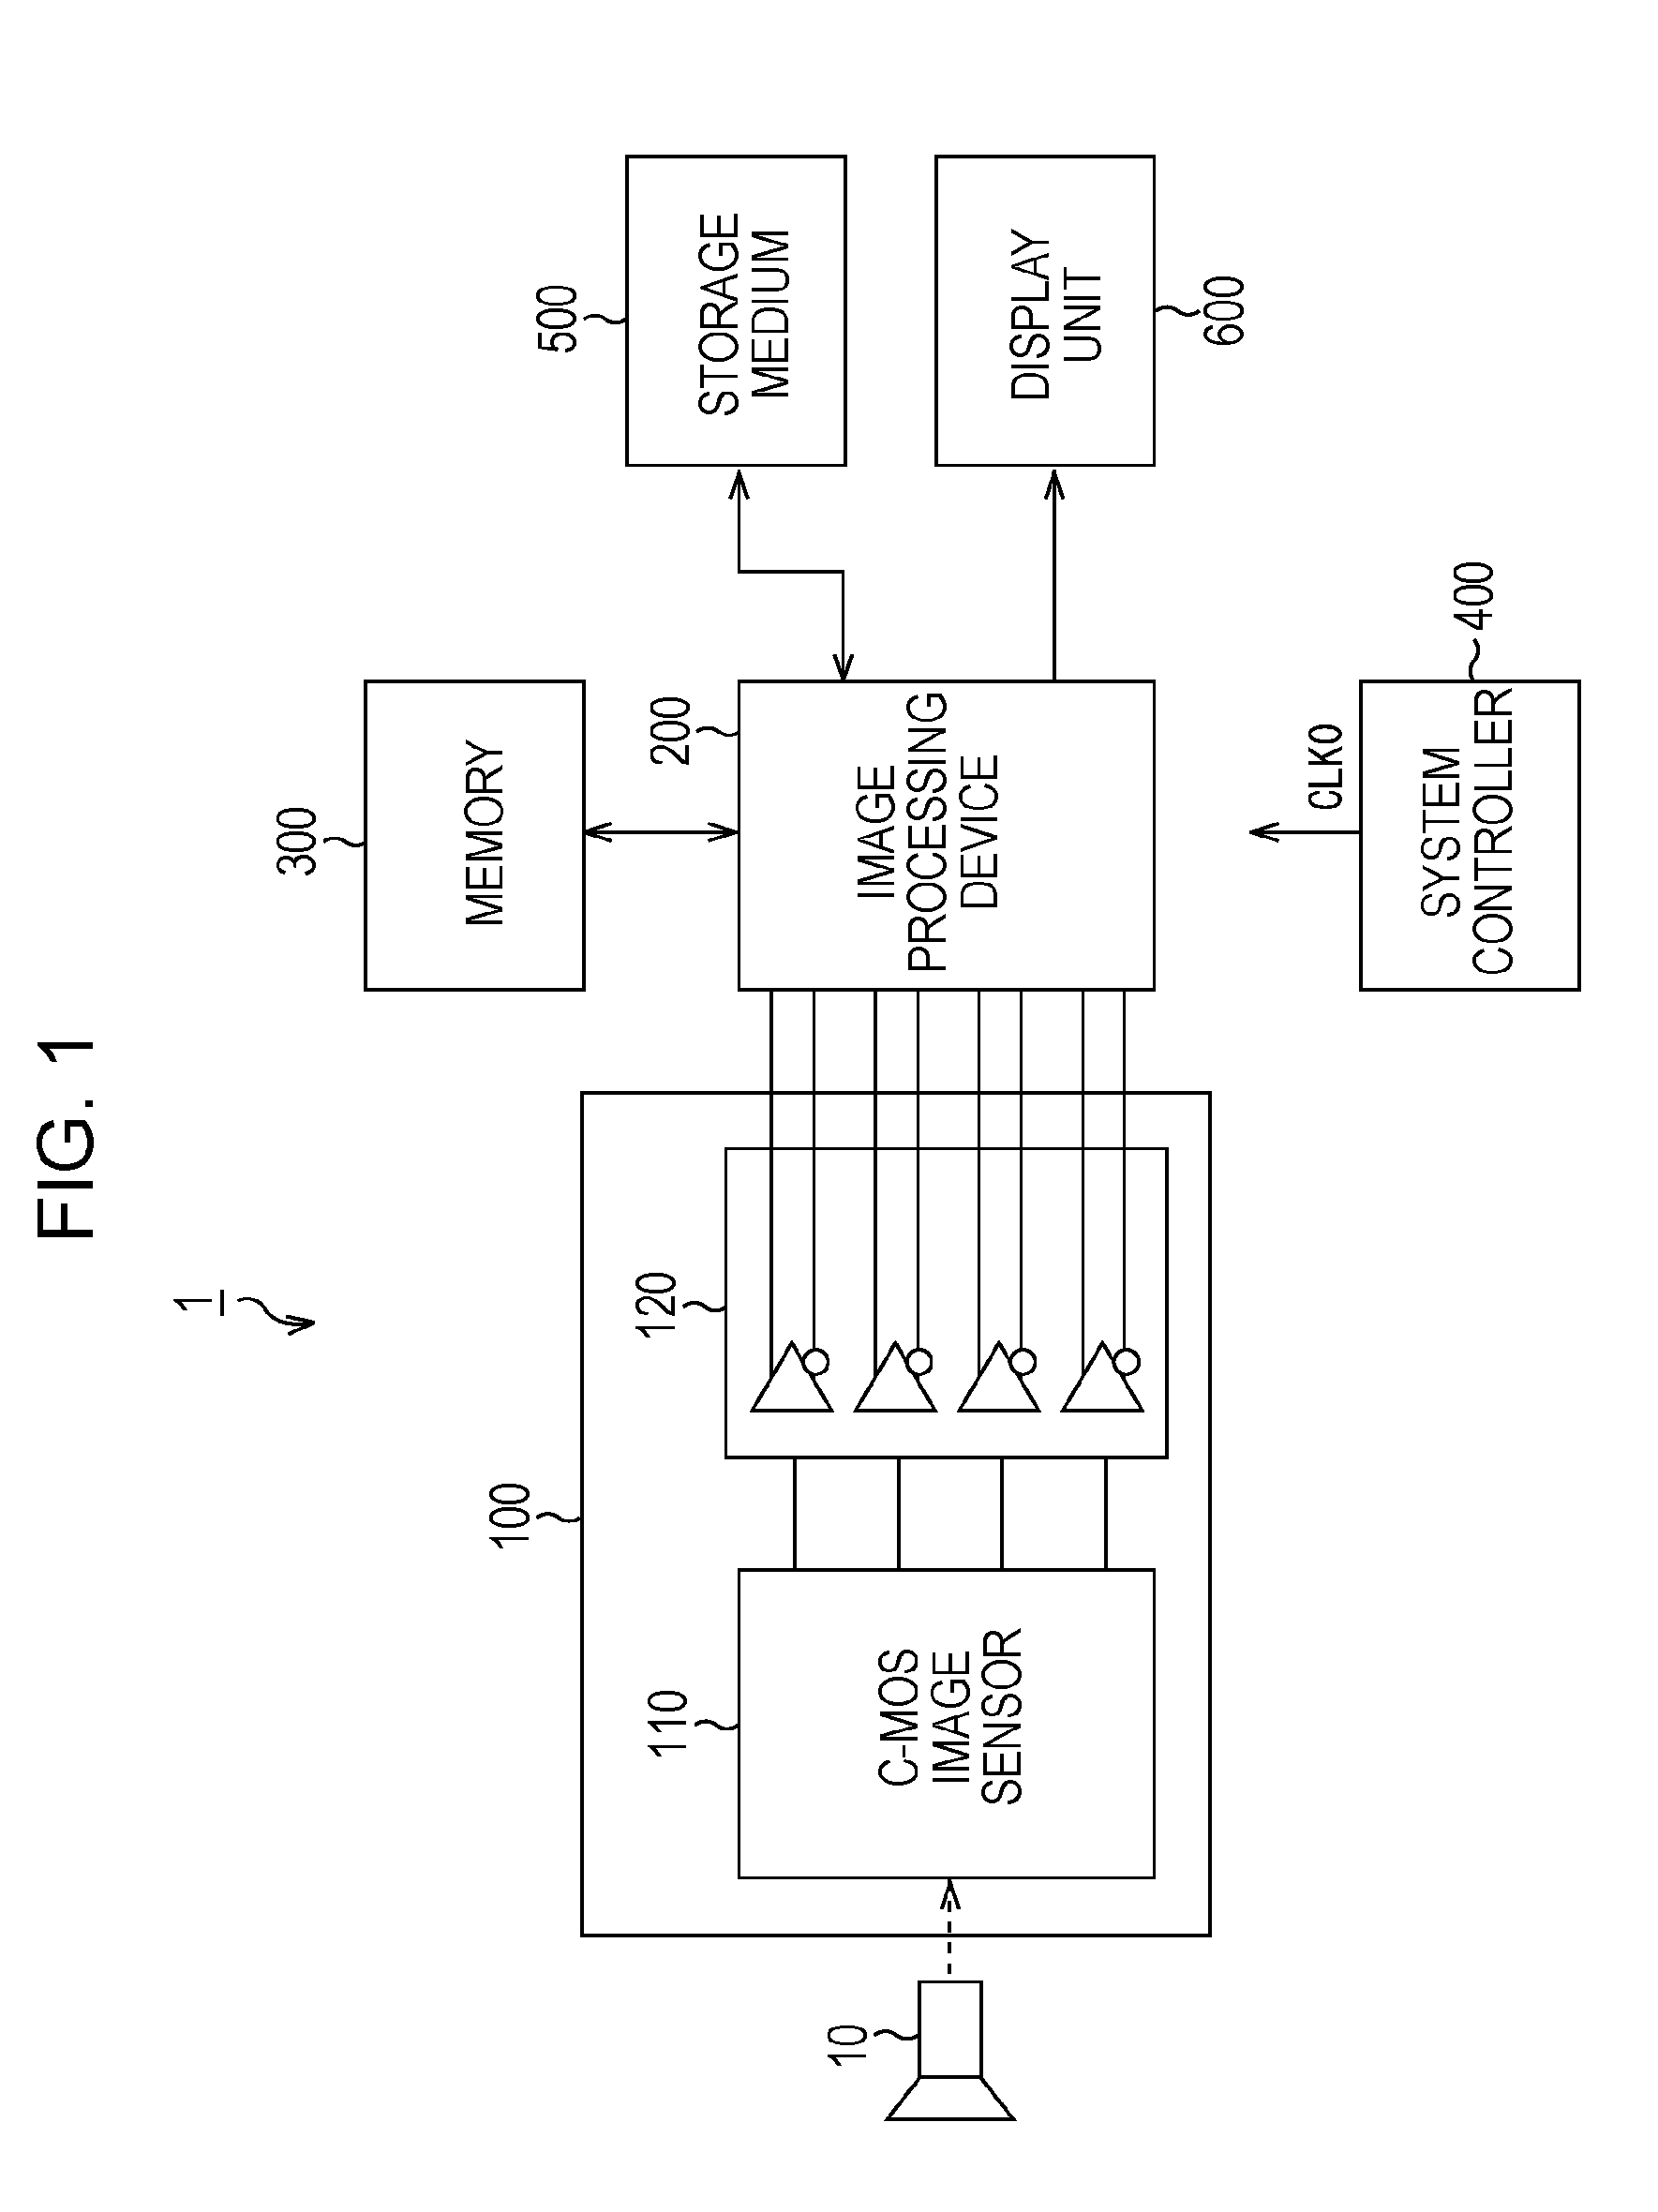 Solid-state image pick-up device, data transmission method, and image pickup apparatus